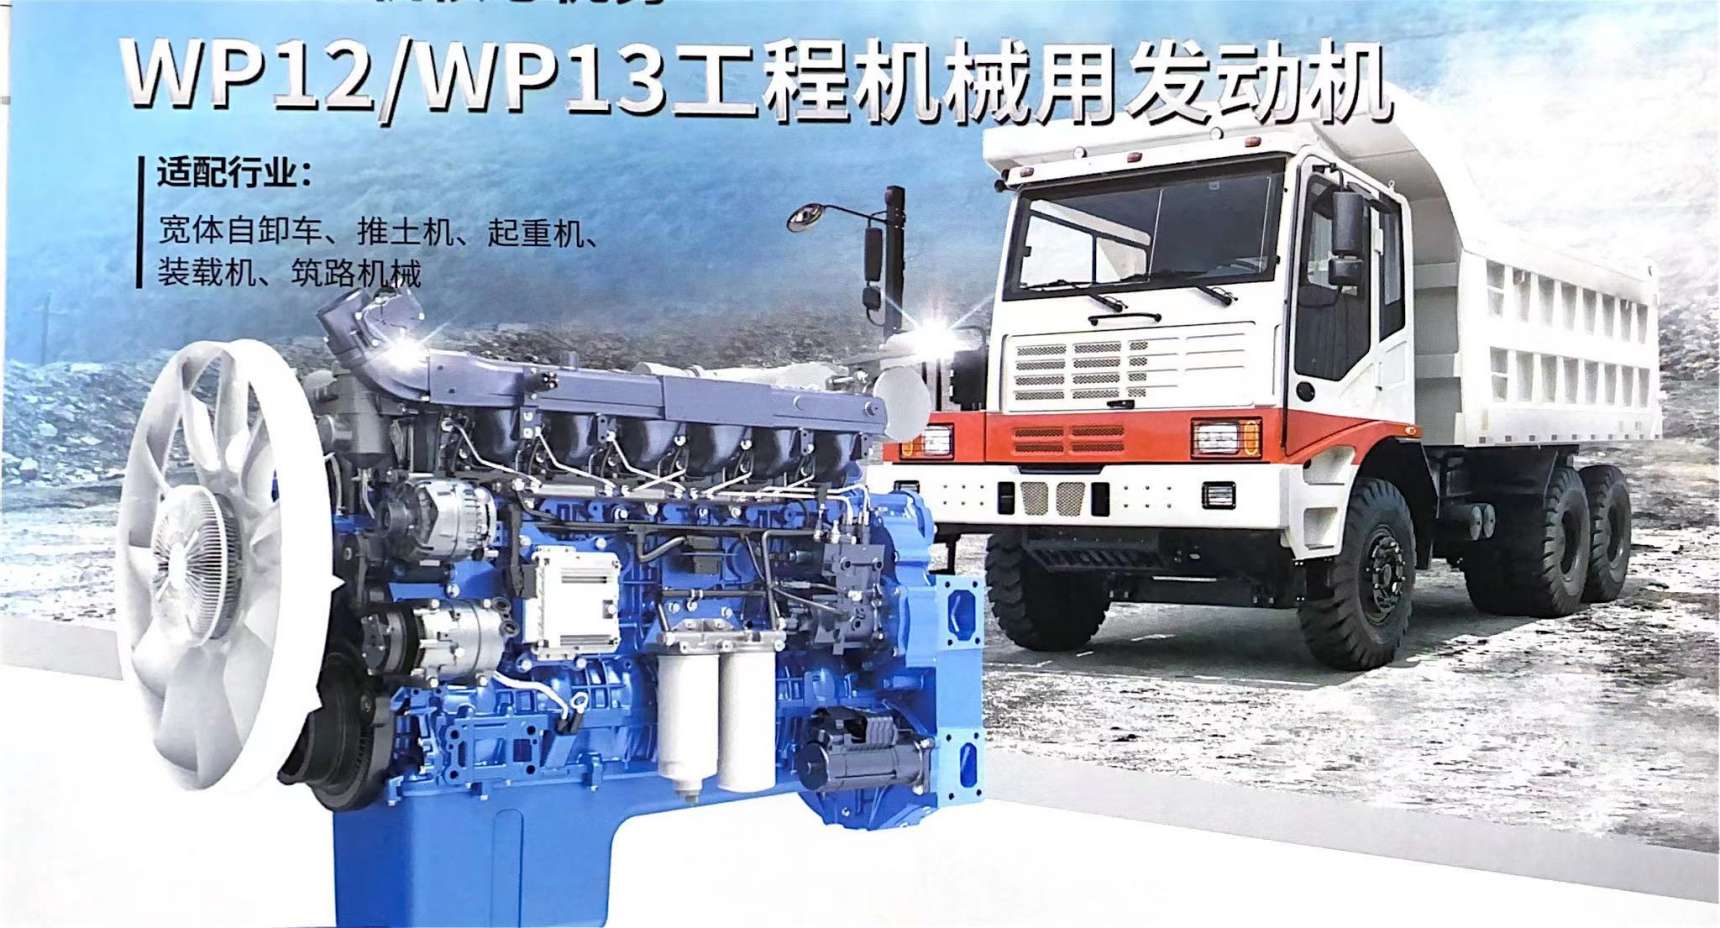 Weichai Stable 4 Storke WP12 Construction Engine for Excavator